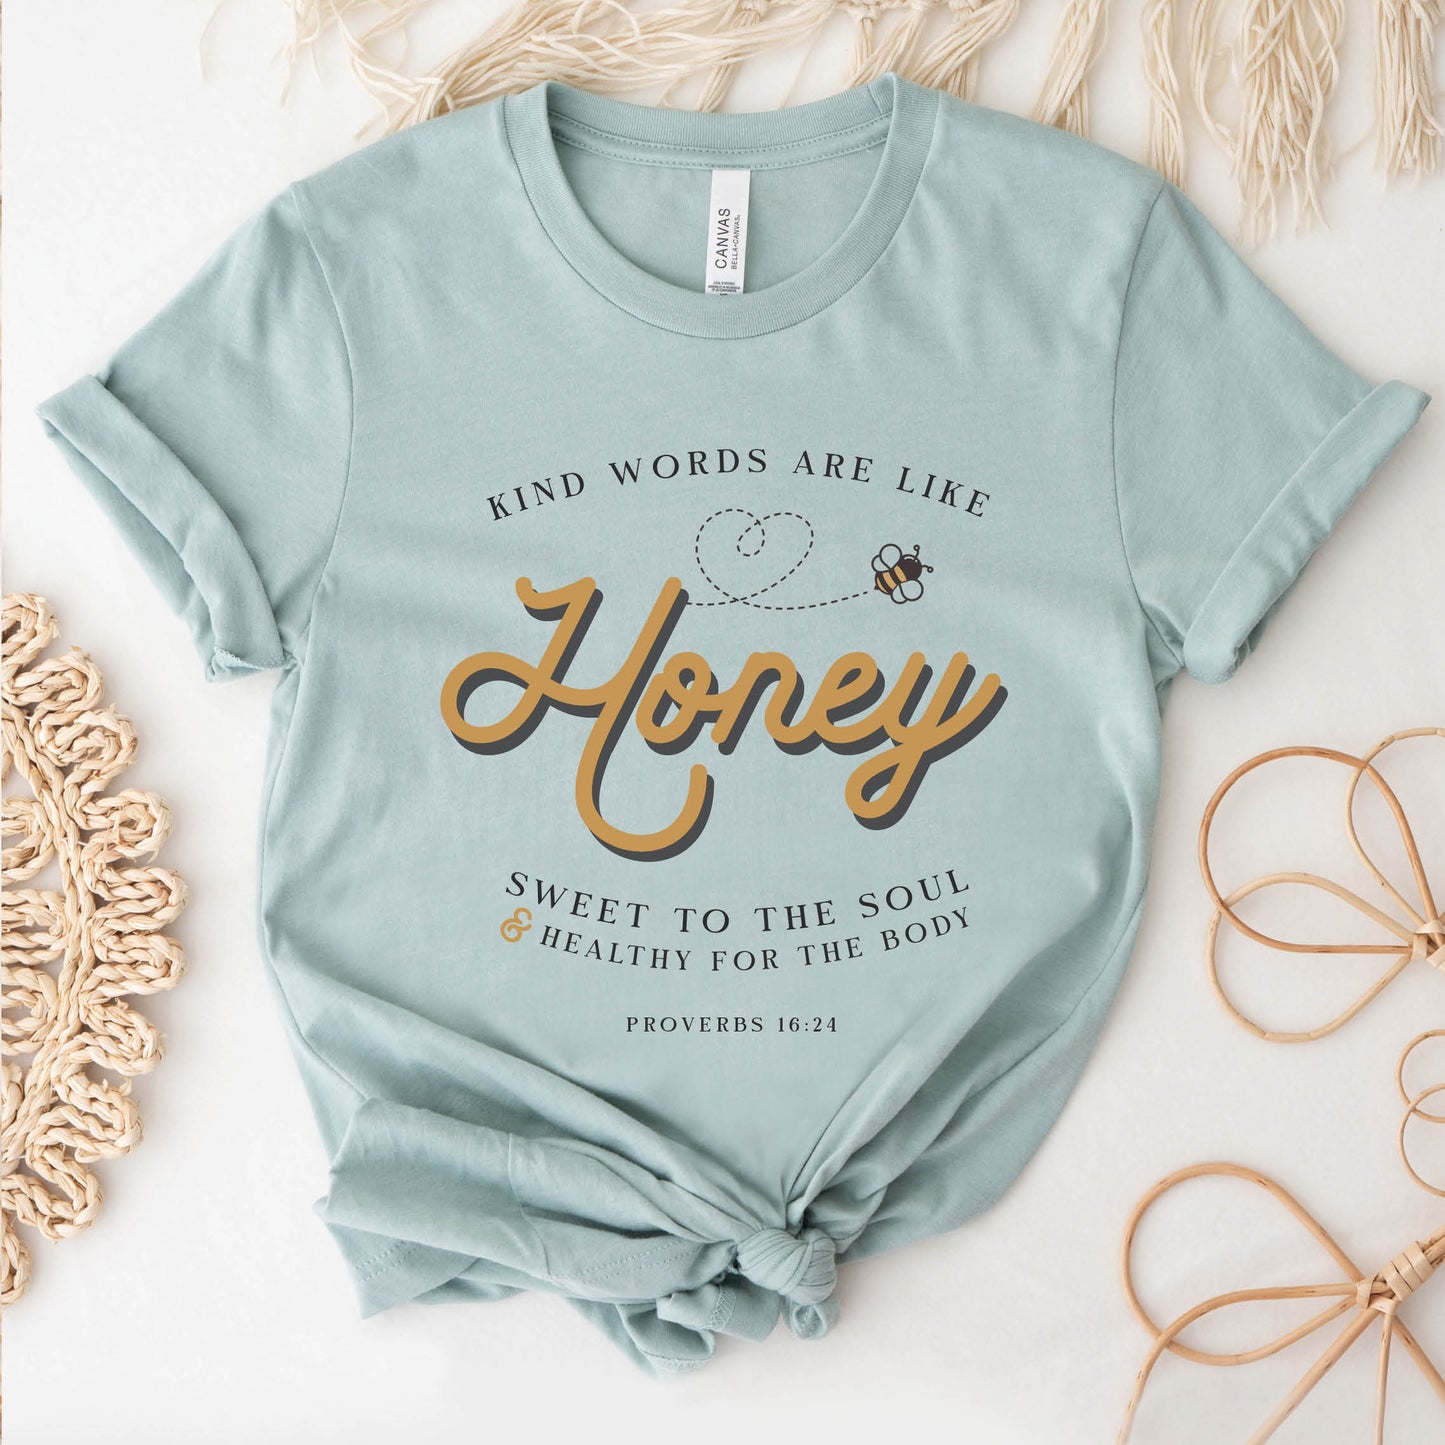 Dusty blue & gold Christian aesthetic unisex faith-based kindness bee t-shirt for women with Proverbs 16:24 bible verse quote that says, "Kind Words Are Like Honey, Sweet To the Soul, and Healthy For the Body" 